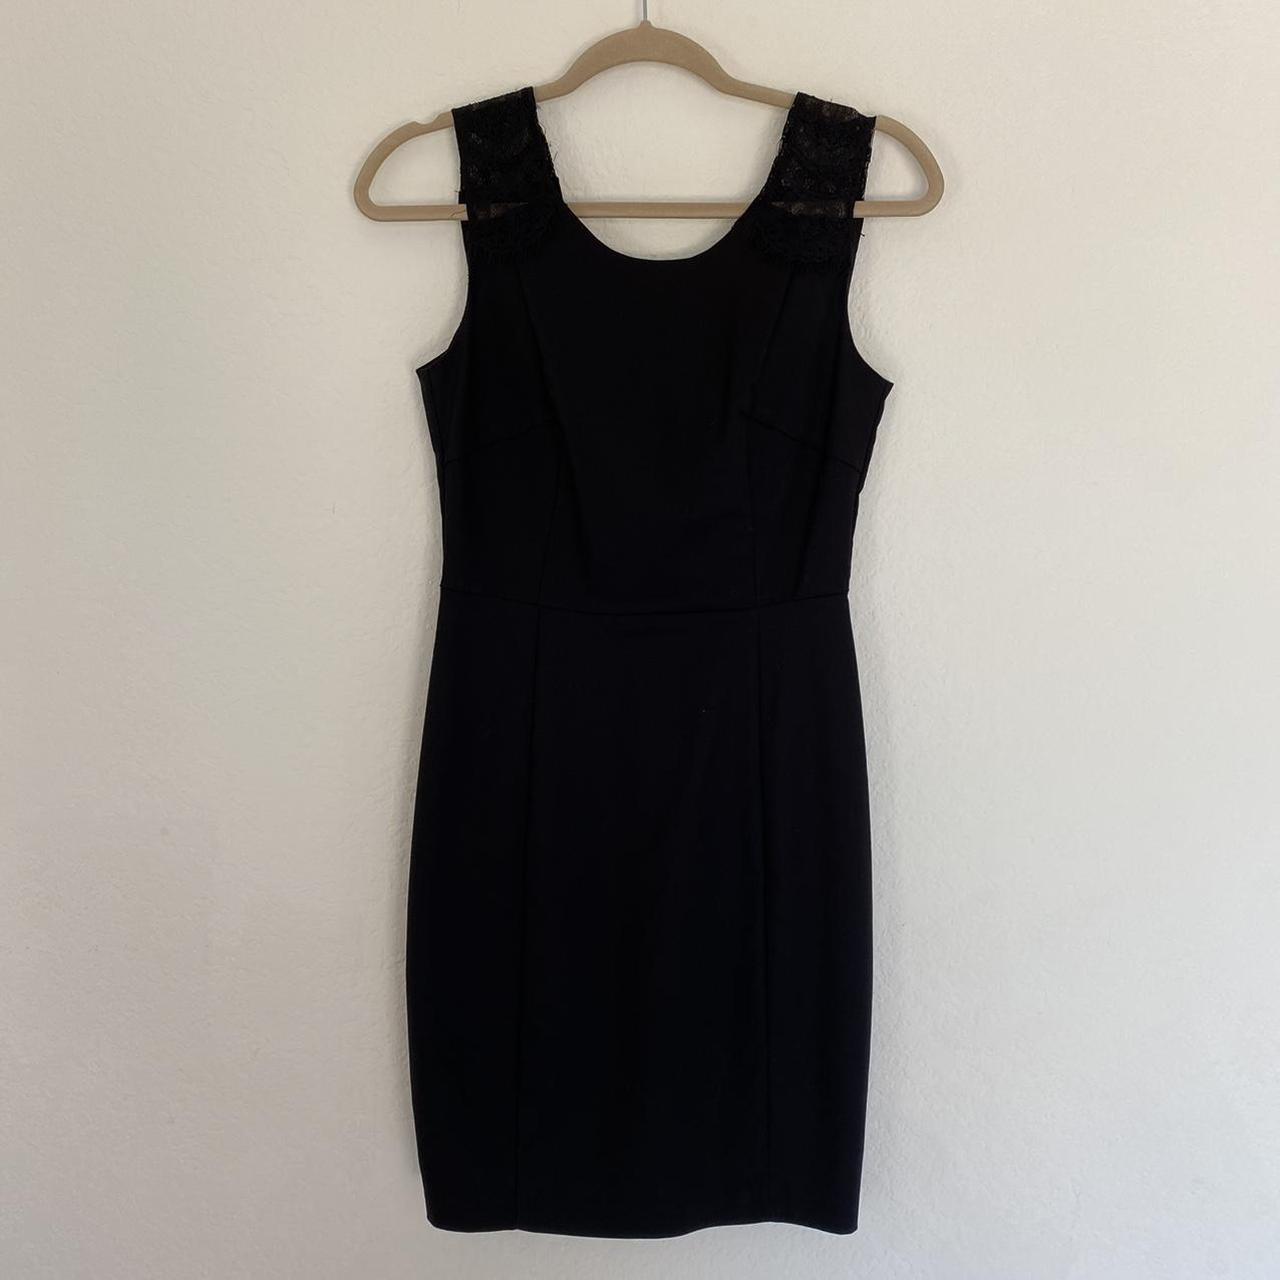 Black Dress Forever 21 size small worn once,... - Depop